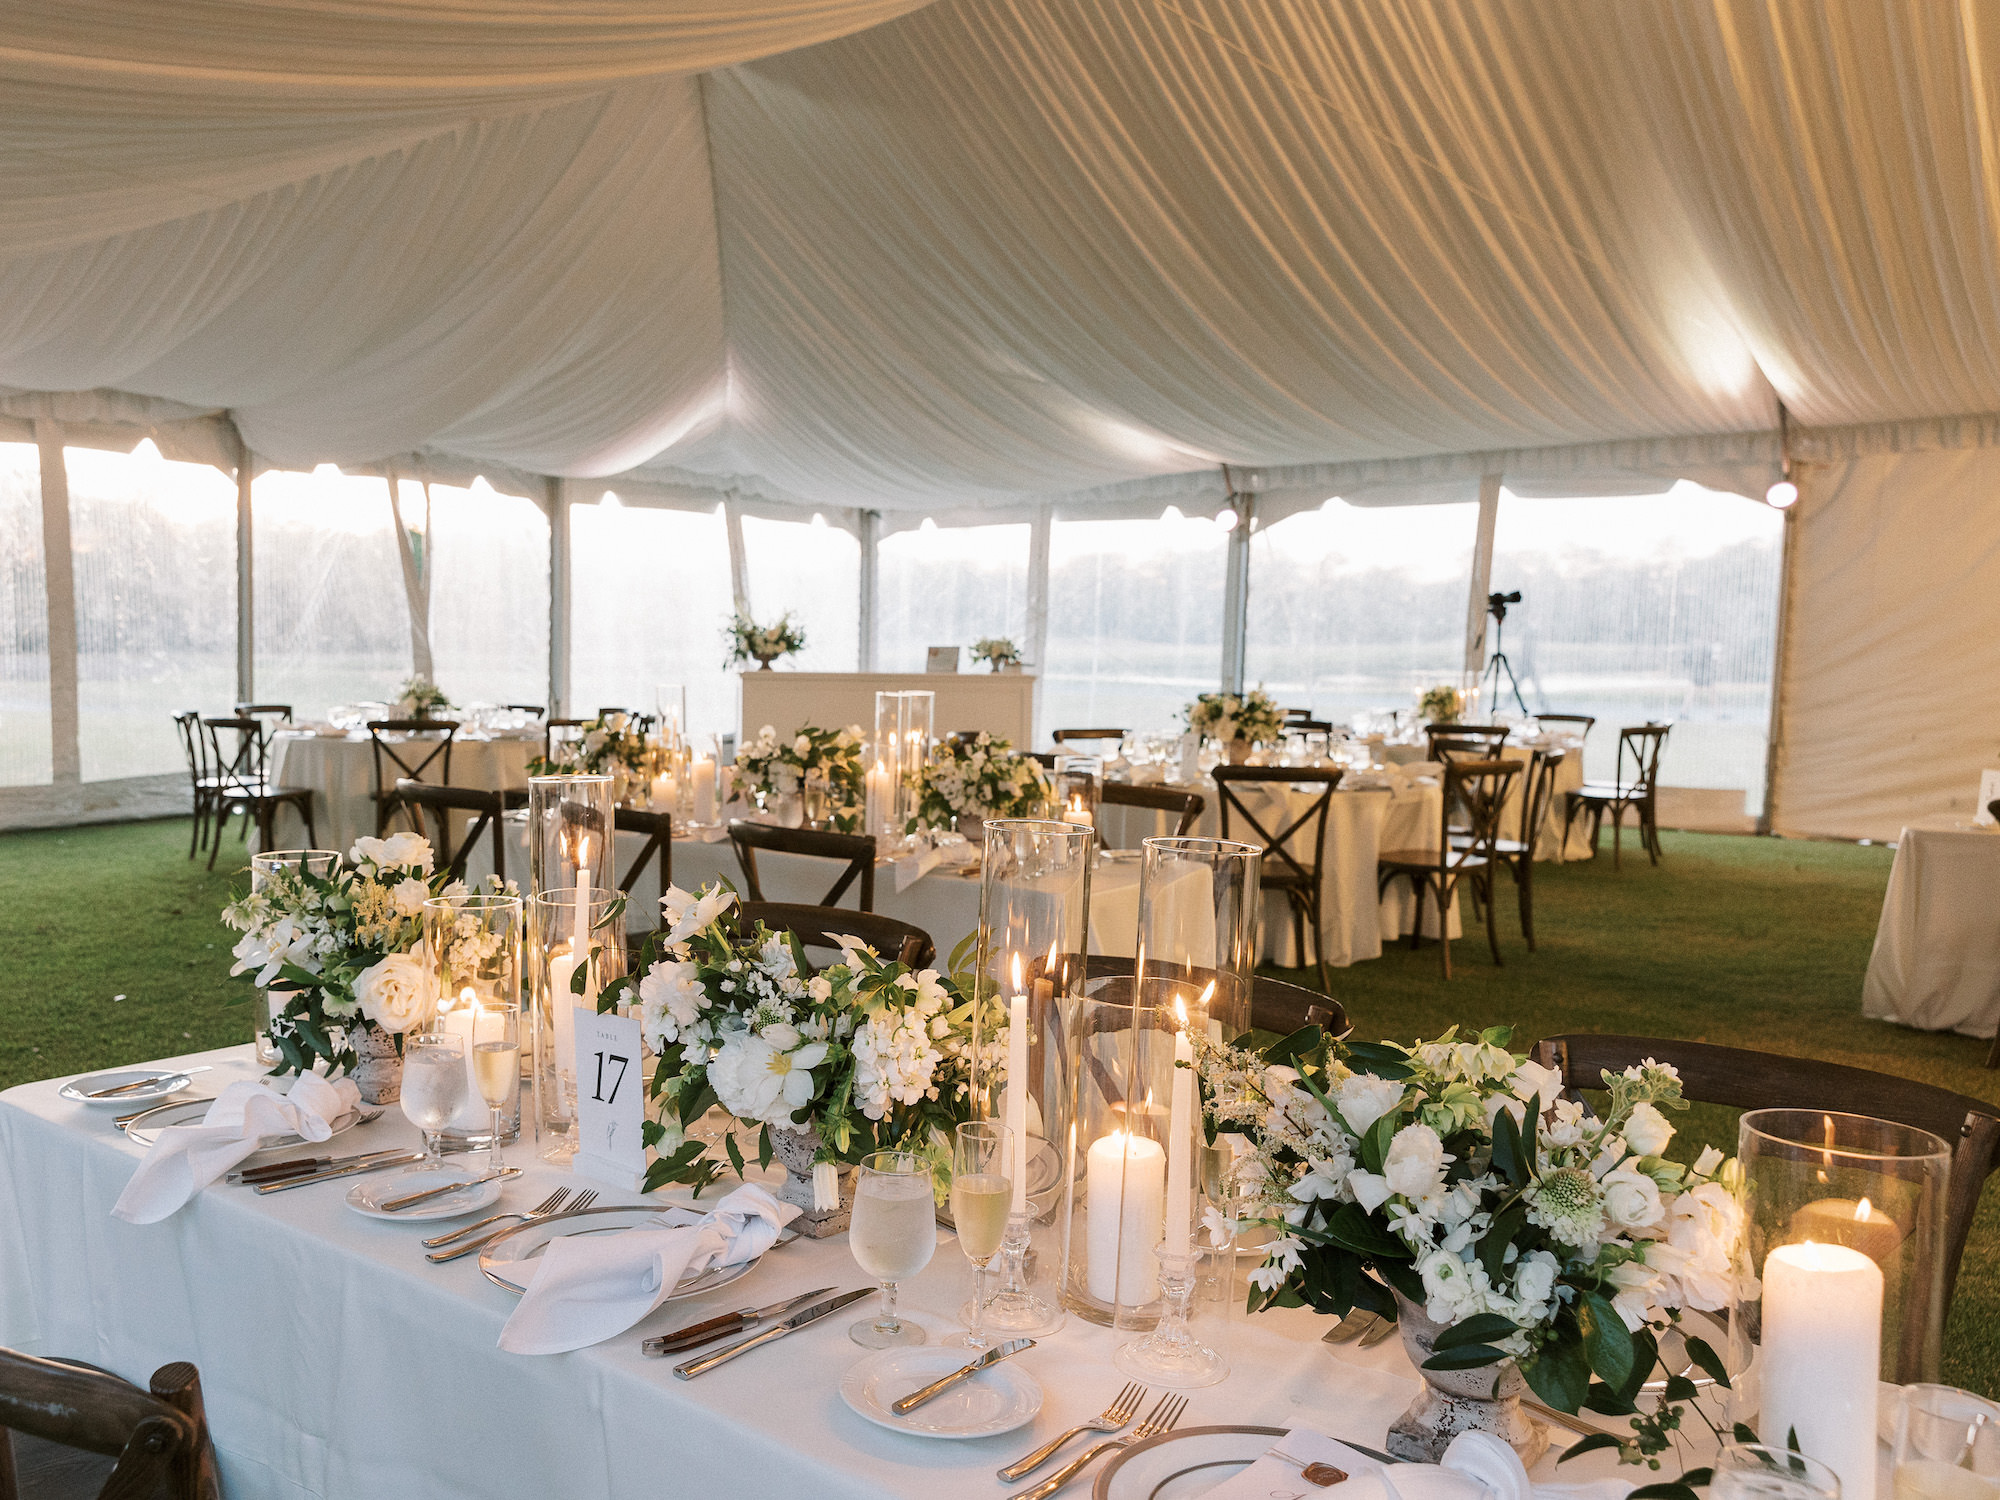 Old Florida Elegant White Tent Wedding Reception Decor, Long Tables with Wooden Cross Back Chairs, Candles, Low White Roses and Greenery Floral Centerpieces